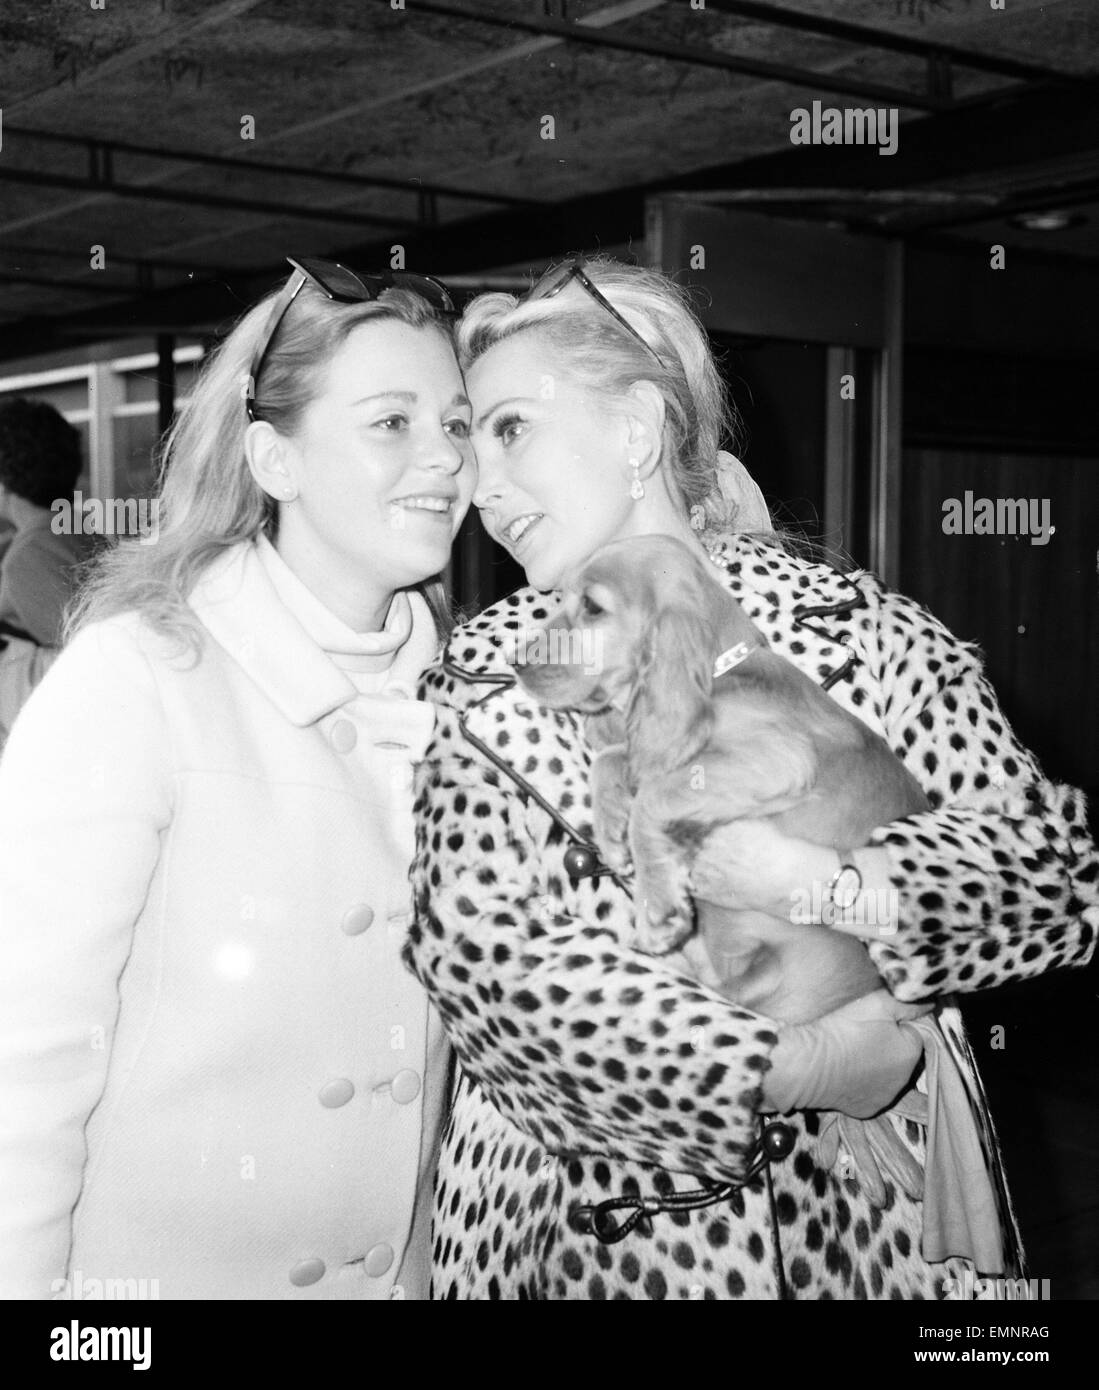 Actress Zsa Zsa Gabor arrives at London Heathrow Airport from New York  Friday 20th September 1968. She was met by her daughter Constance Hilton  a.k.a. Francesca Hilton & with a golden spaniel